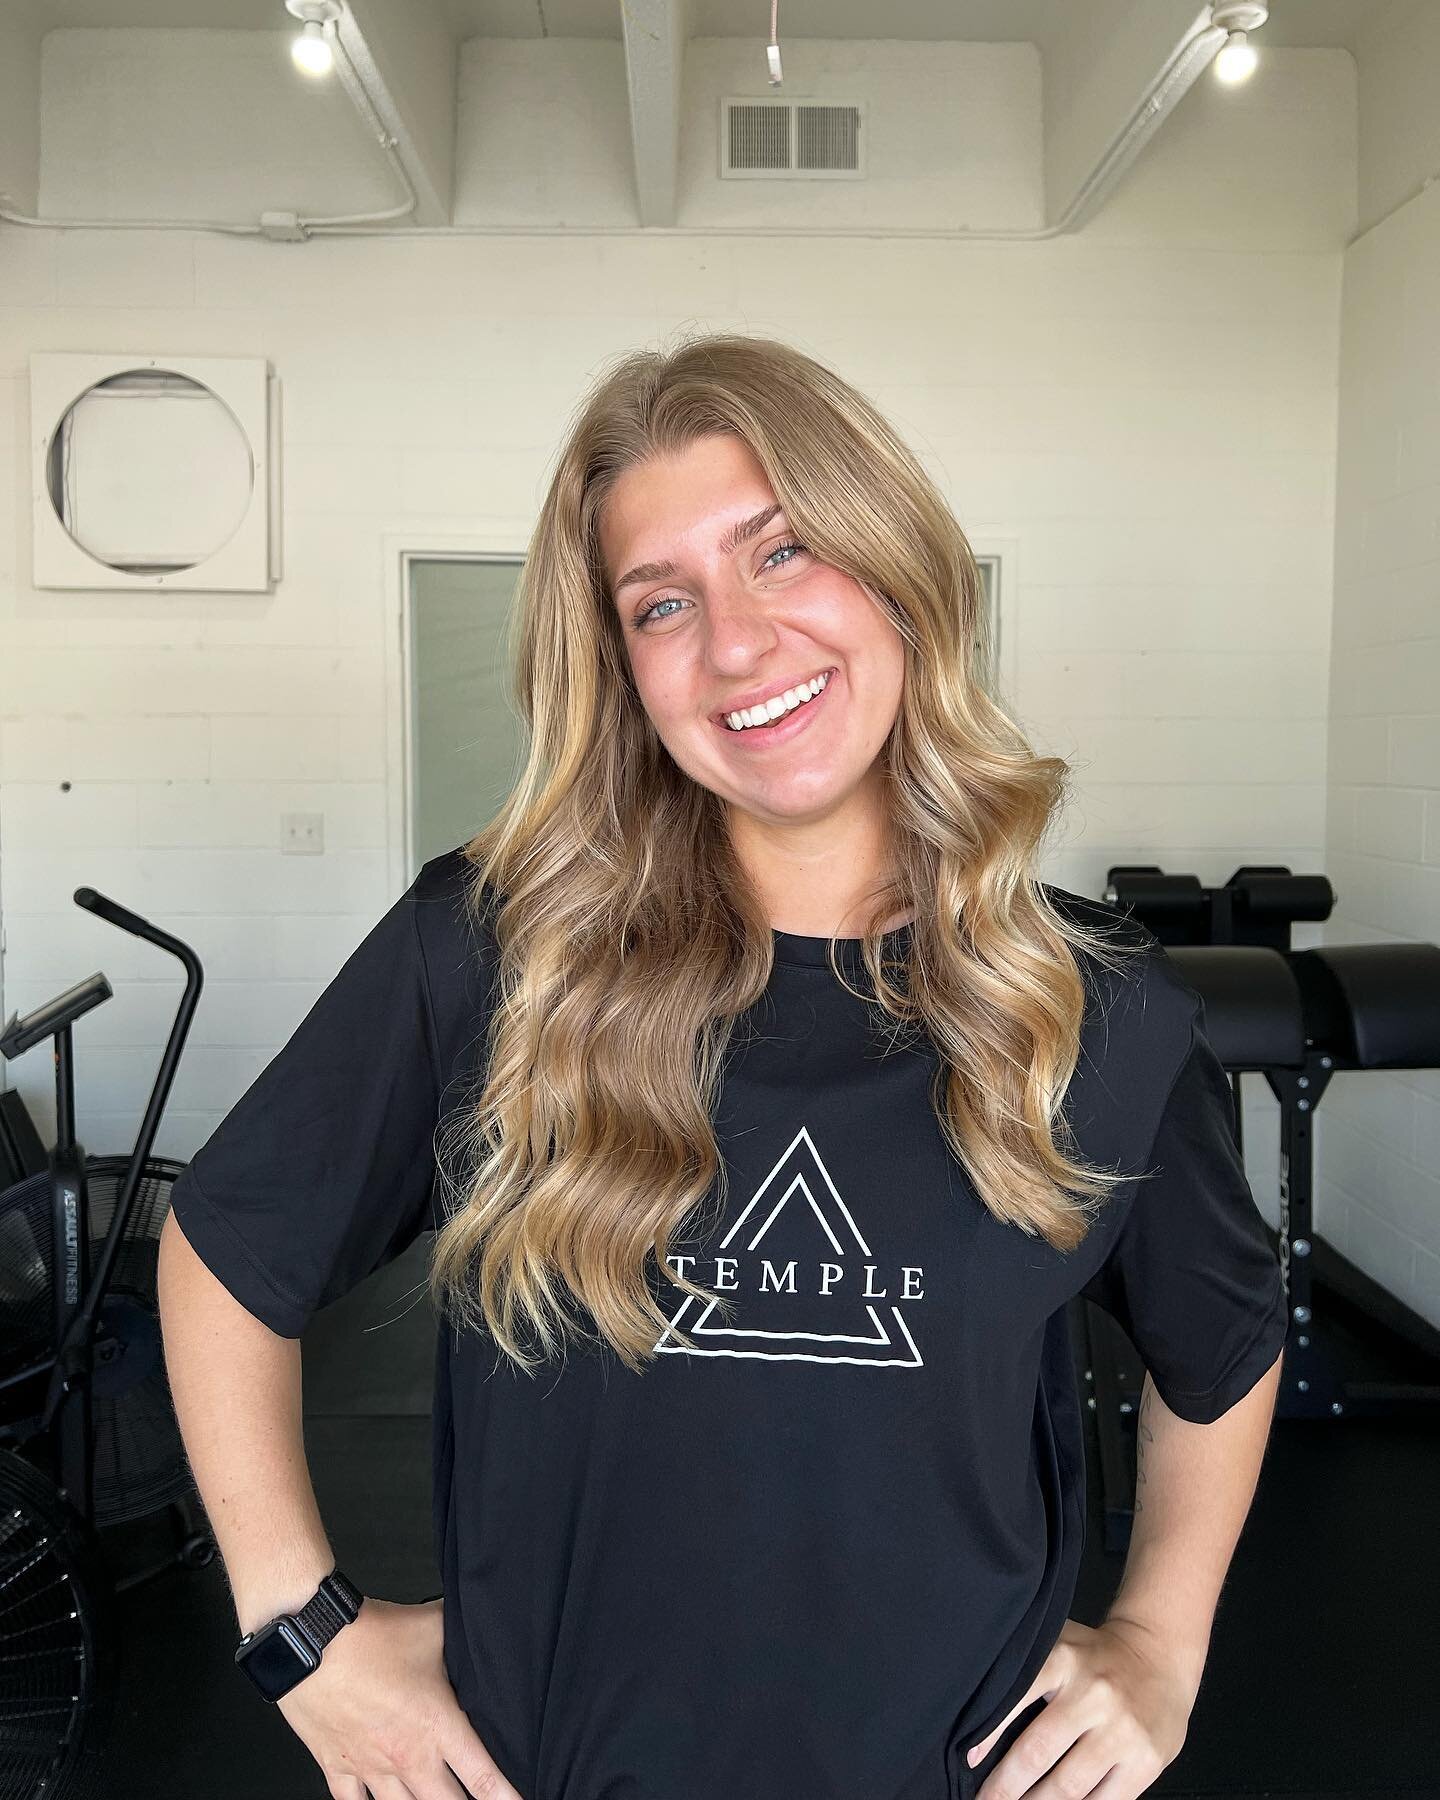 Temple fam, please welcome @emmaastoll 🥳🥳

We are VERY excited to have her on the class schedule starting next week, and accepting personal training clients as well!

Here&rsquo;s a little bit about her in her own words:

&ldquo;Hey y'all!
I got ce